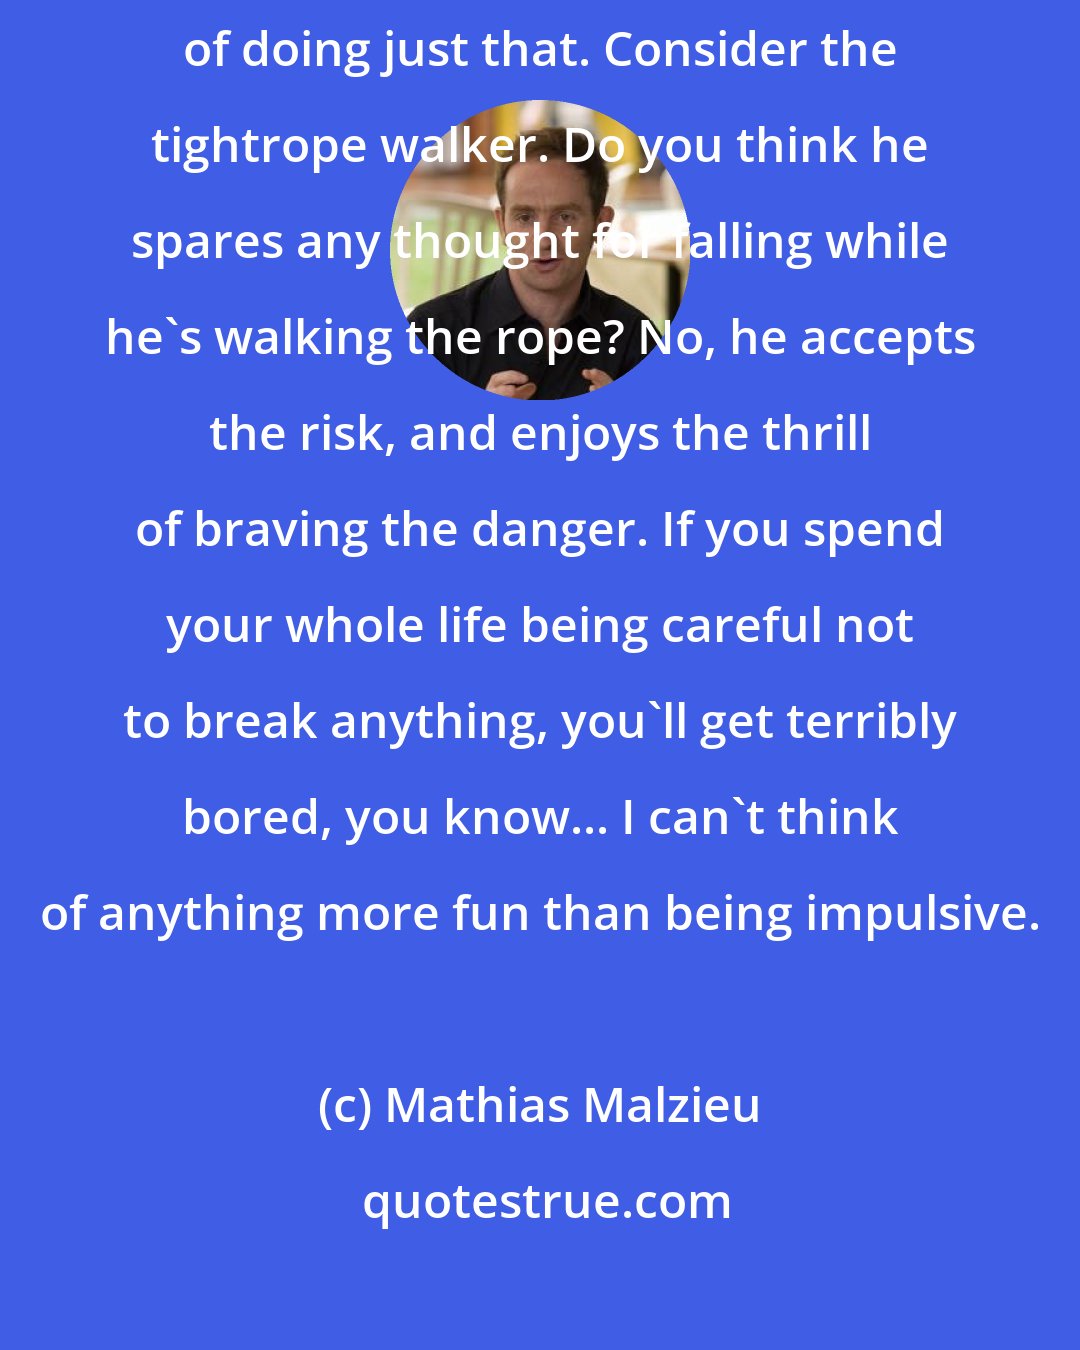 Mathias Malzieu: If you're frightened of damaging yourself, you increase the risk of doing just that. Consider the tightrope walker. Do you think he spares any thought for falling while he's walking the rope? No, he accepts the risk, and enjoys the thrill of braving the danger. If you spend your whole life being careful not to break anything, you'll get terribly bored, you know... I can't think of anything more fun than being impulsive.